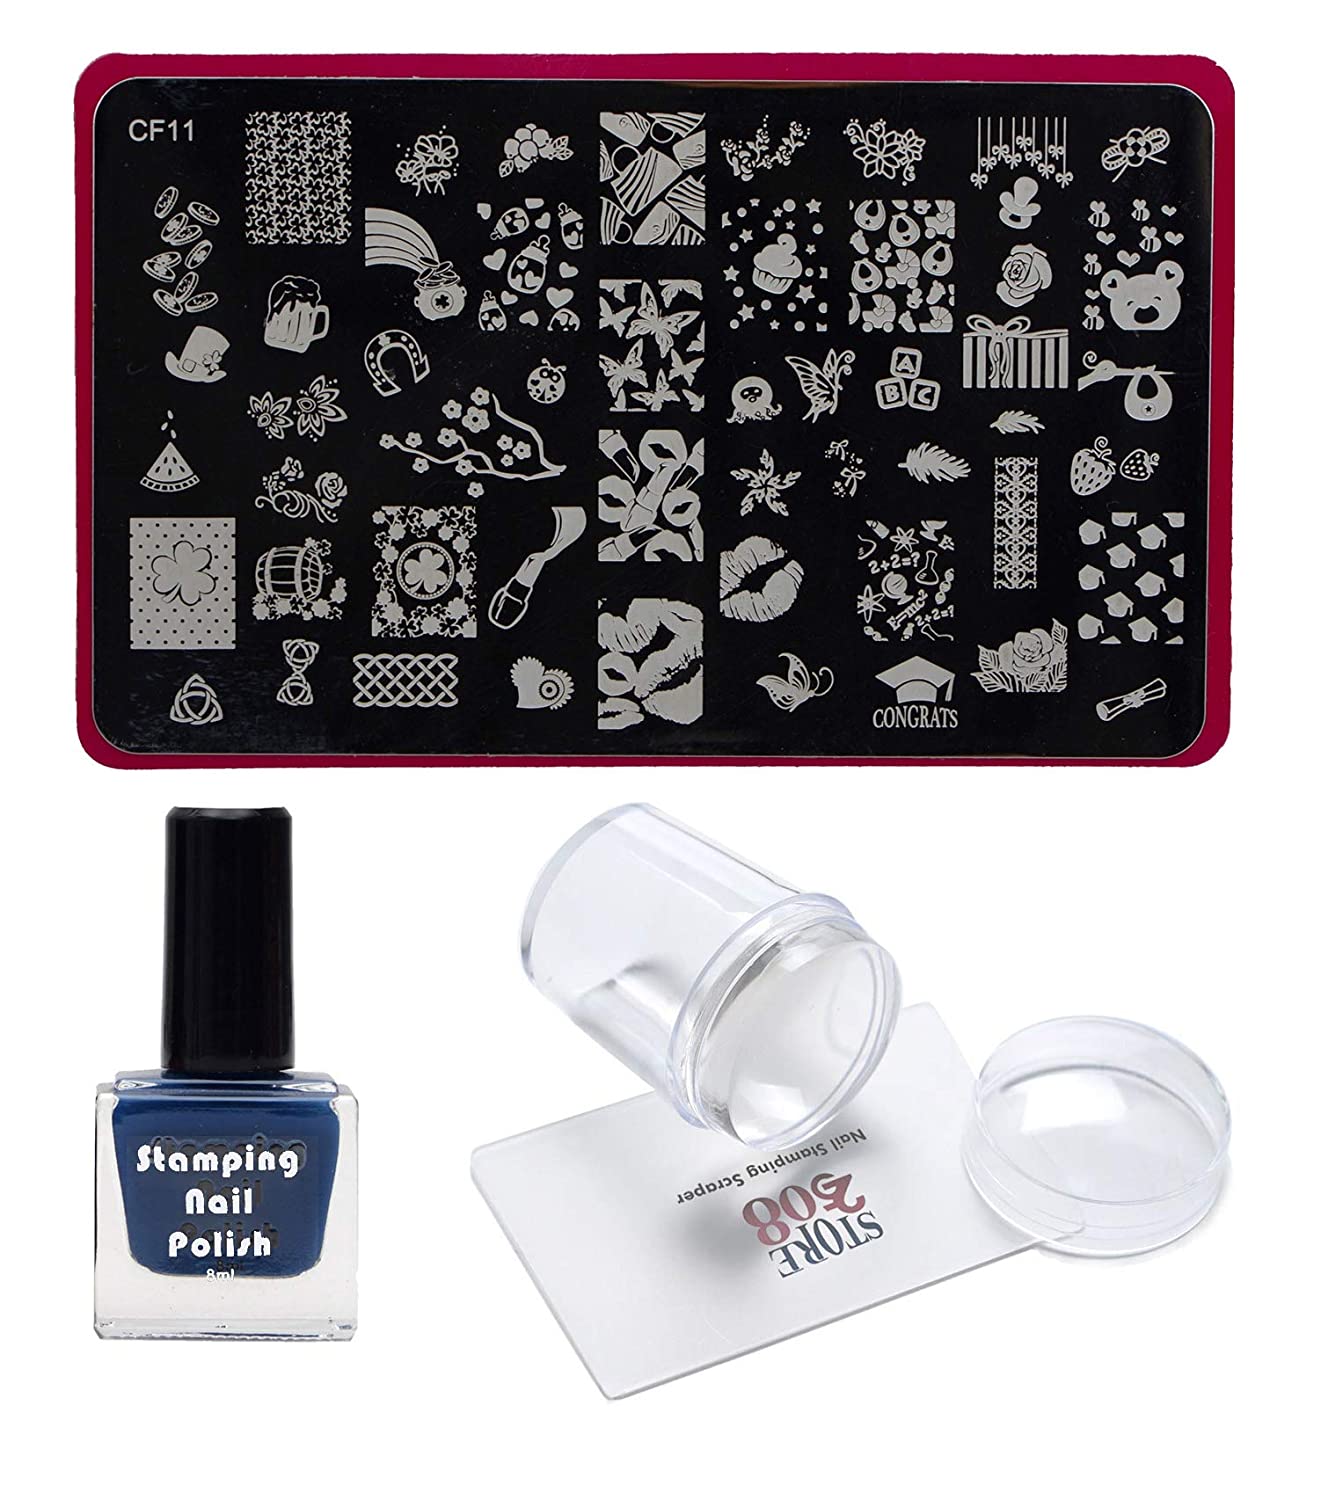 FStyler Nail Art Stamping Kit | Decorate Your Nail Like A Pro - Price in  India, Buy FStyler Nail Art Stamping Kit | Decorate Your Nail Like A Pro  Online In India,